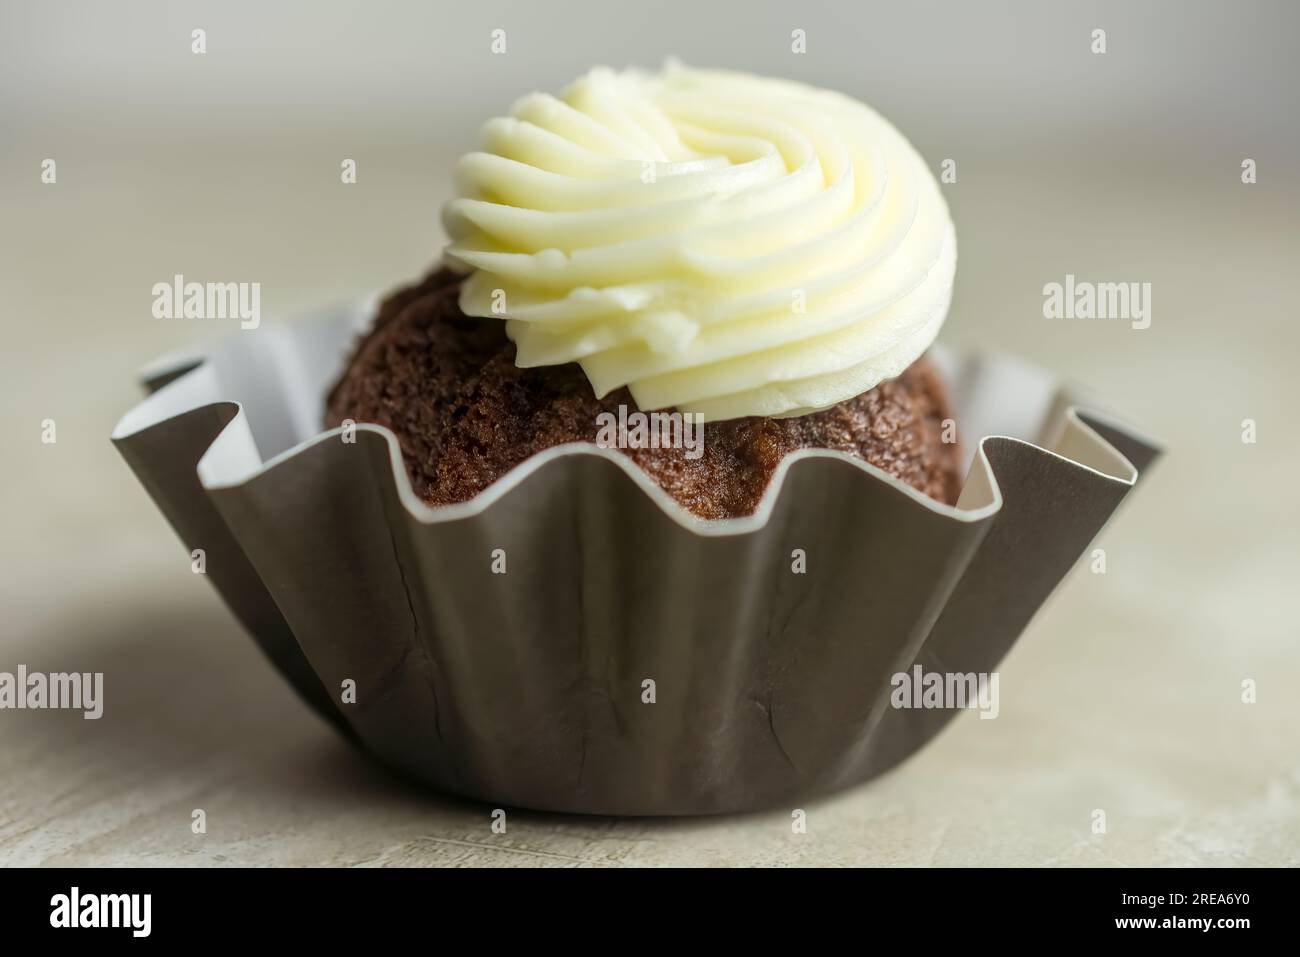 Chocolate cupcake with piped vanilla frosting. Stock Photo